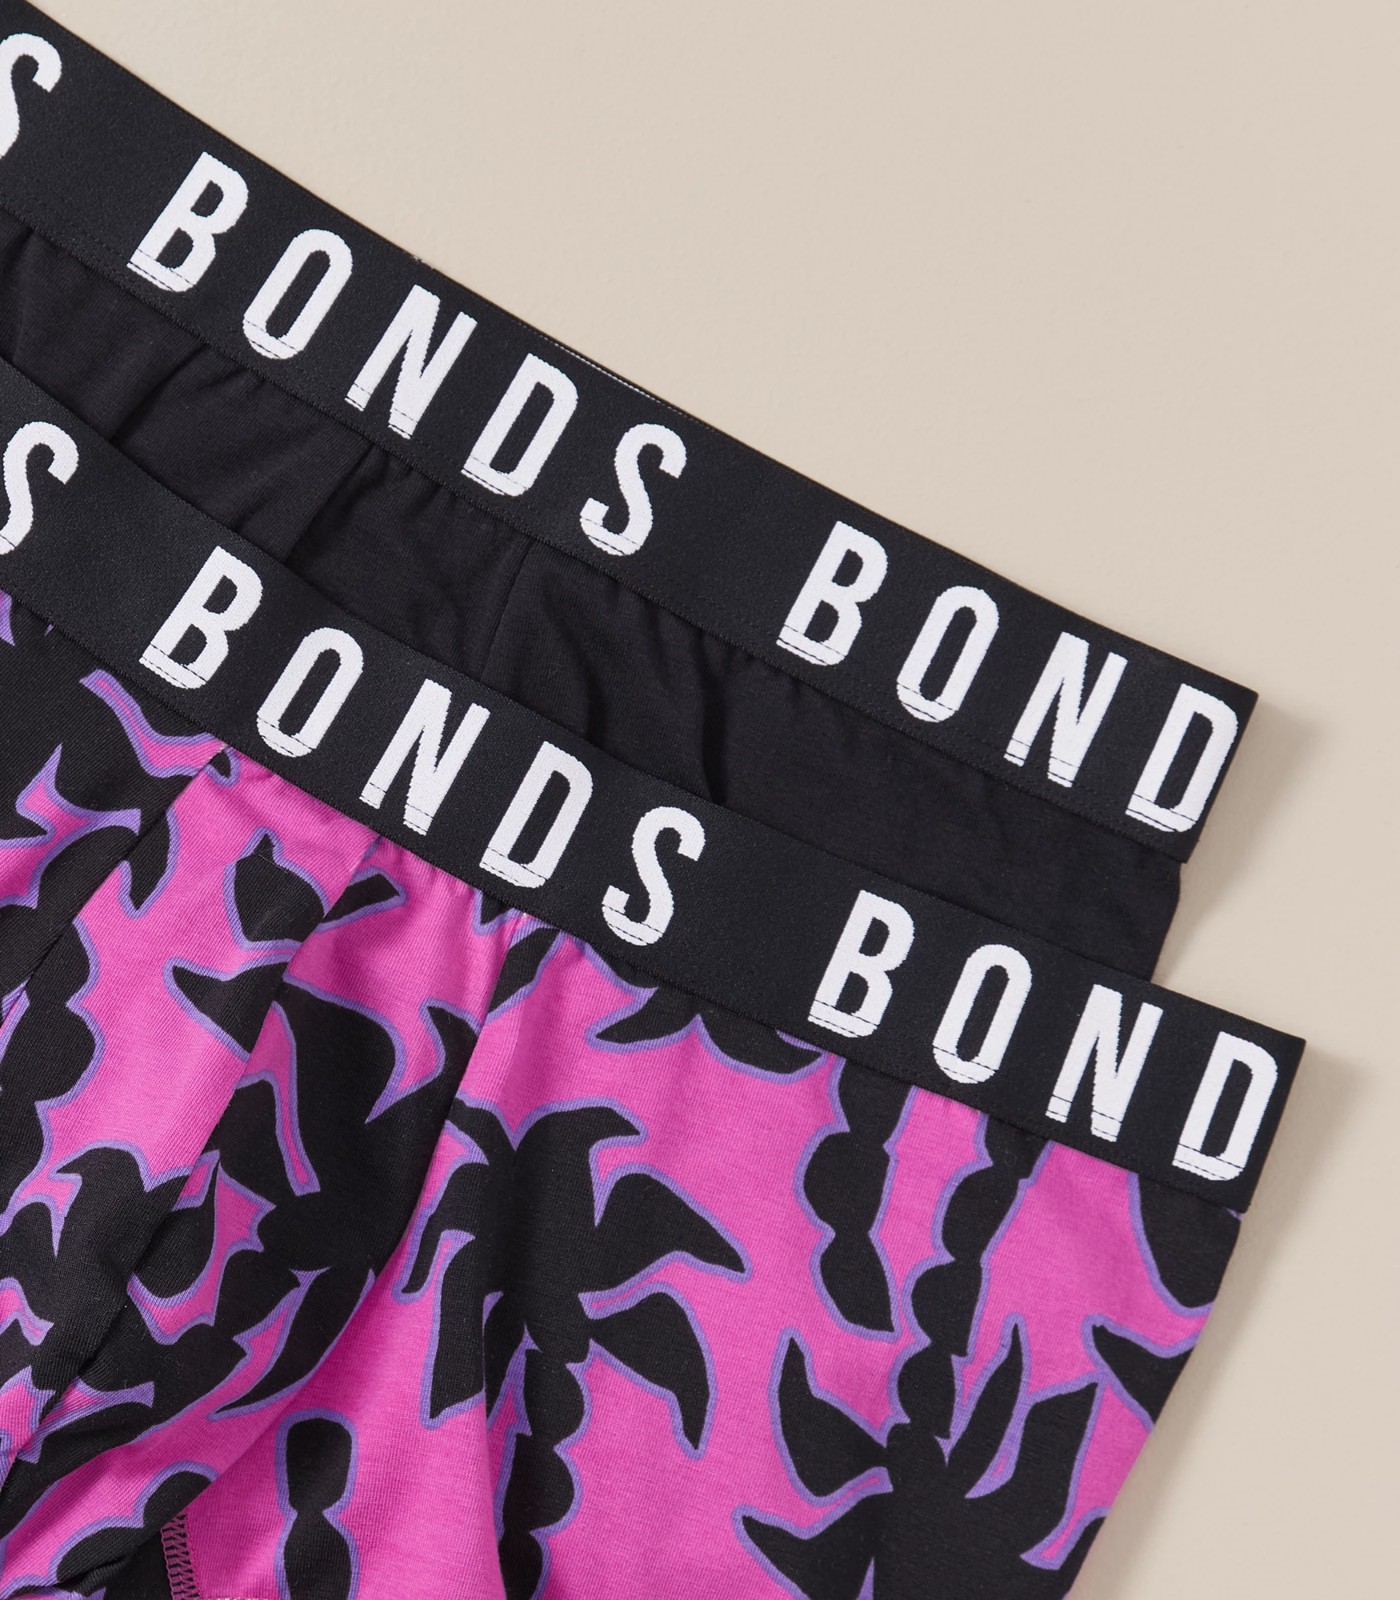 Mens Bonds Stretchables Everyday Trunks Underwear Black With Pink Band –  Tie Store Australia